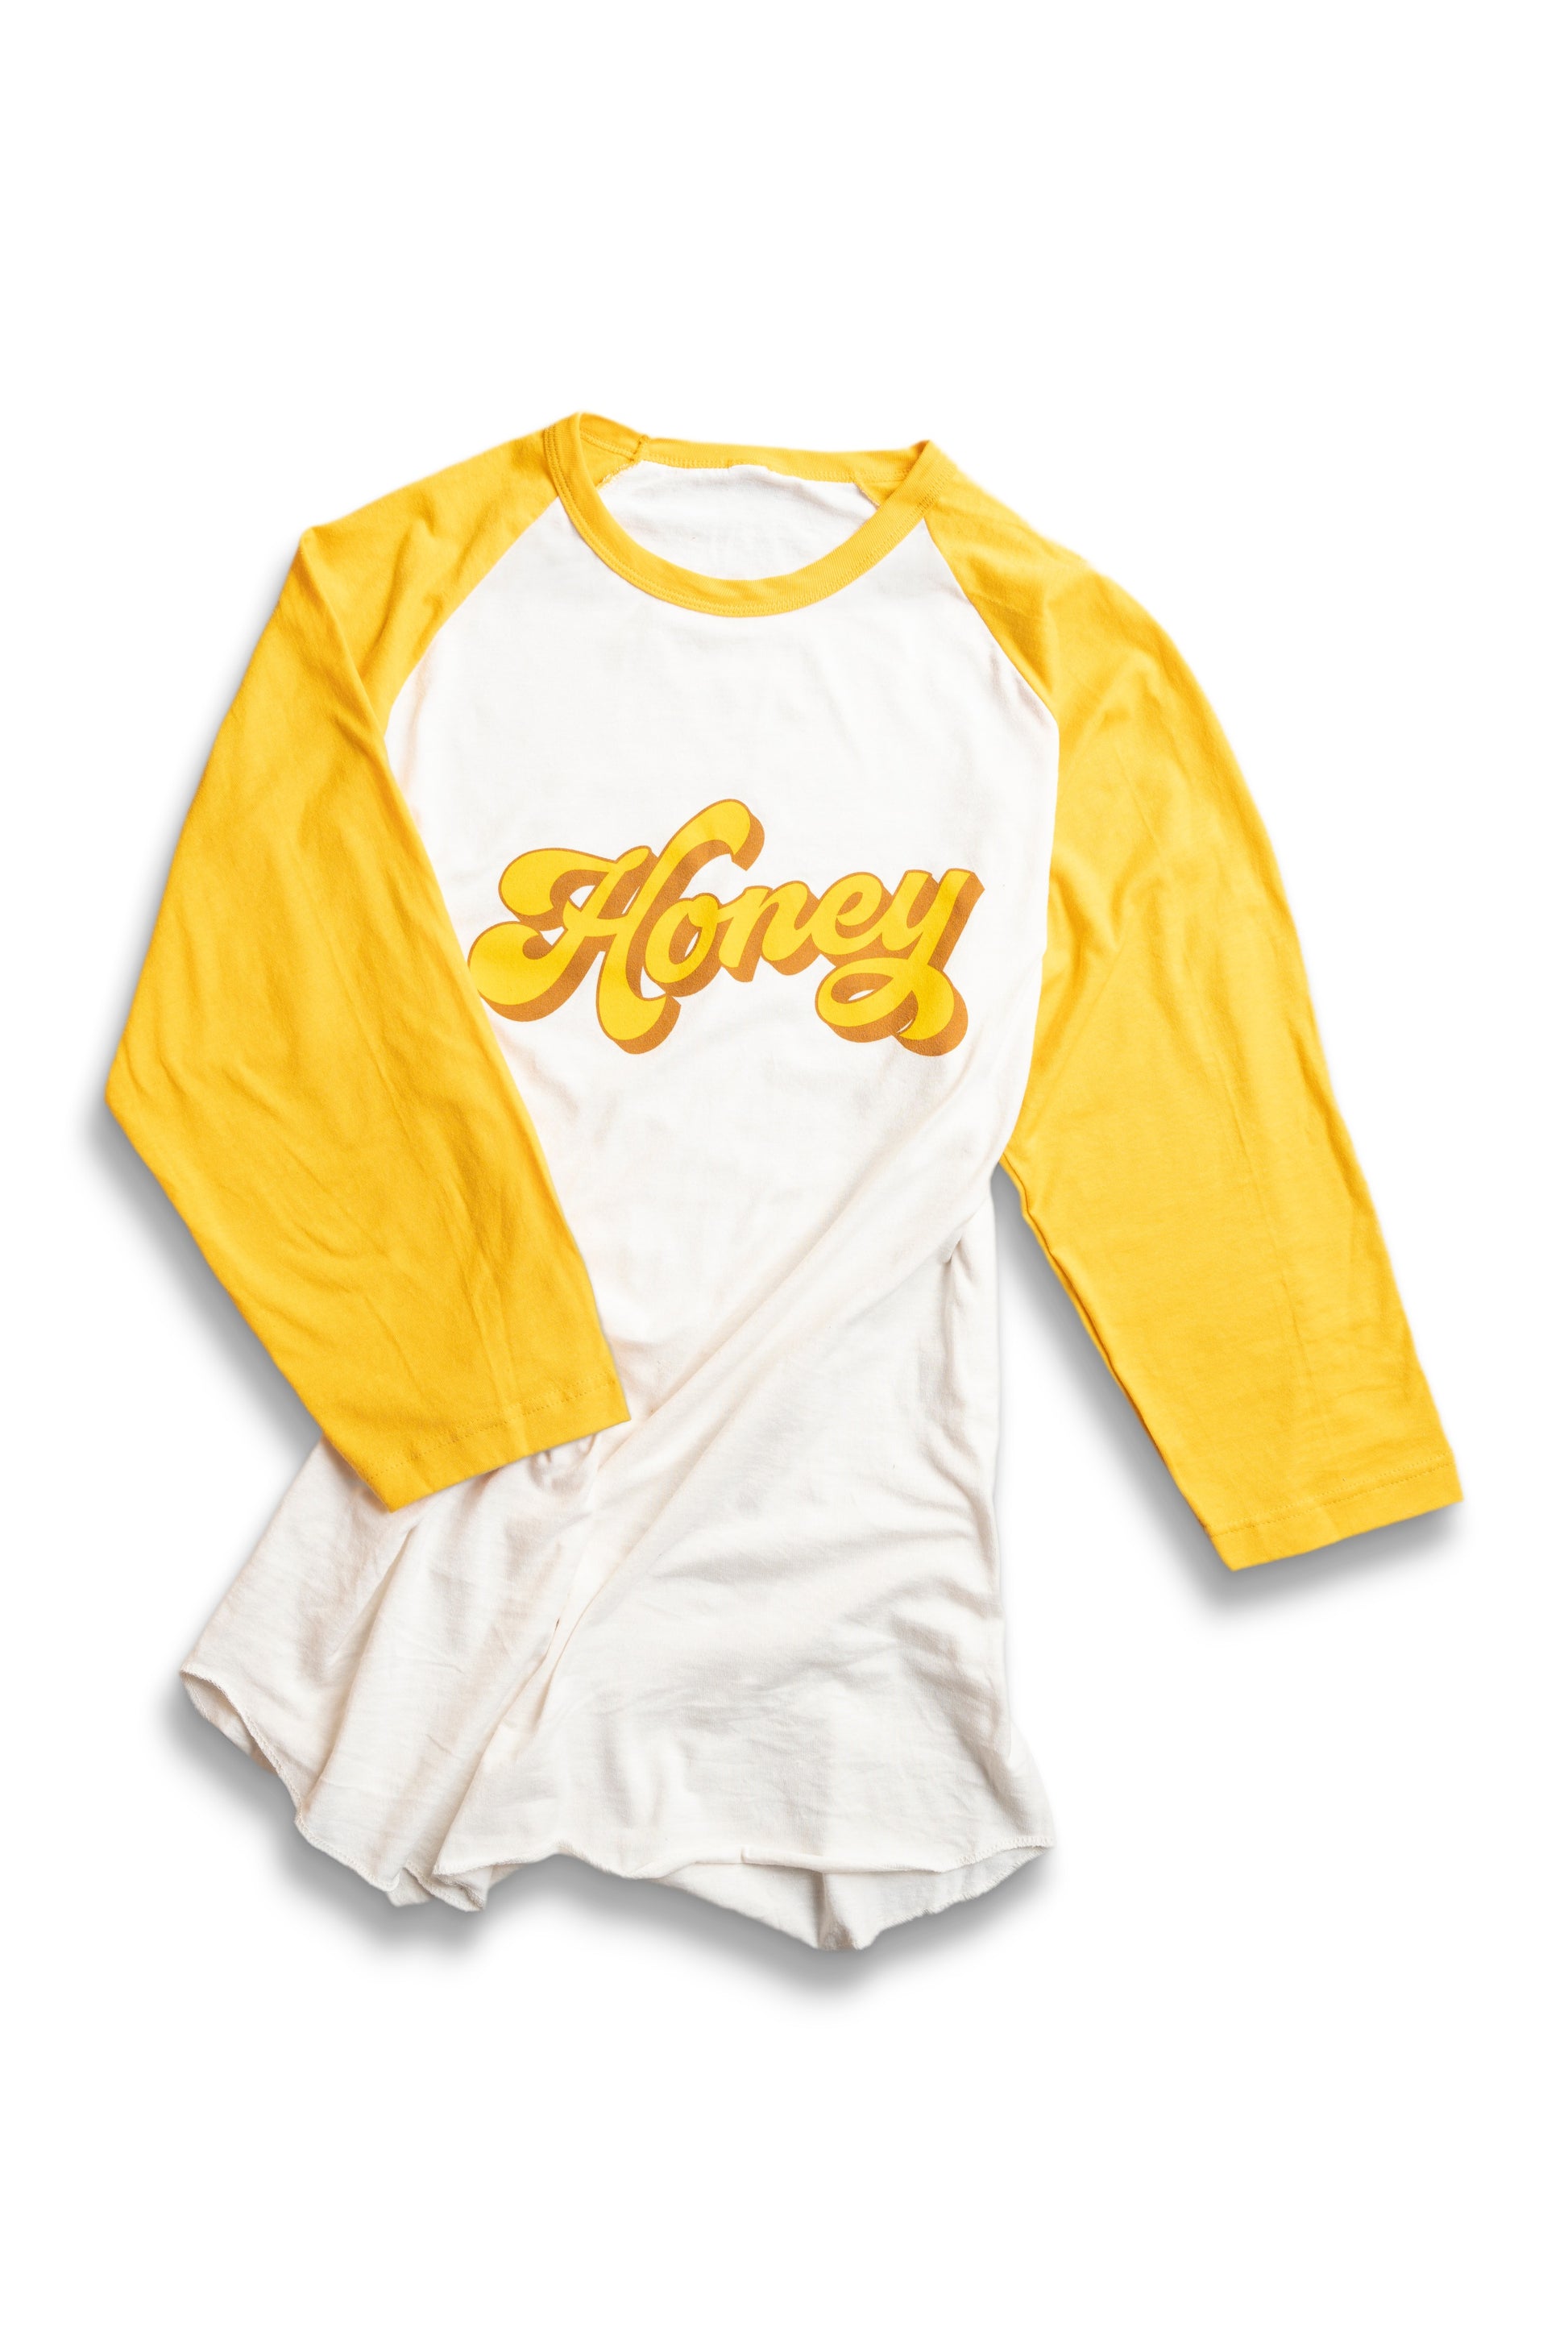 White raglan tee with yellow sleeves with honey in groovy font